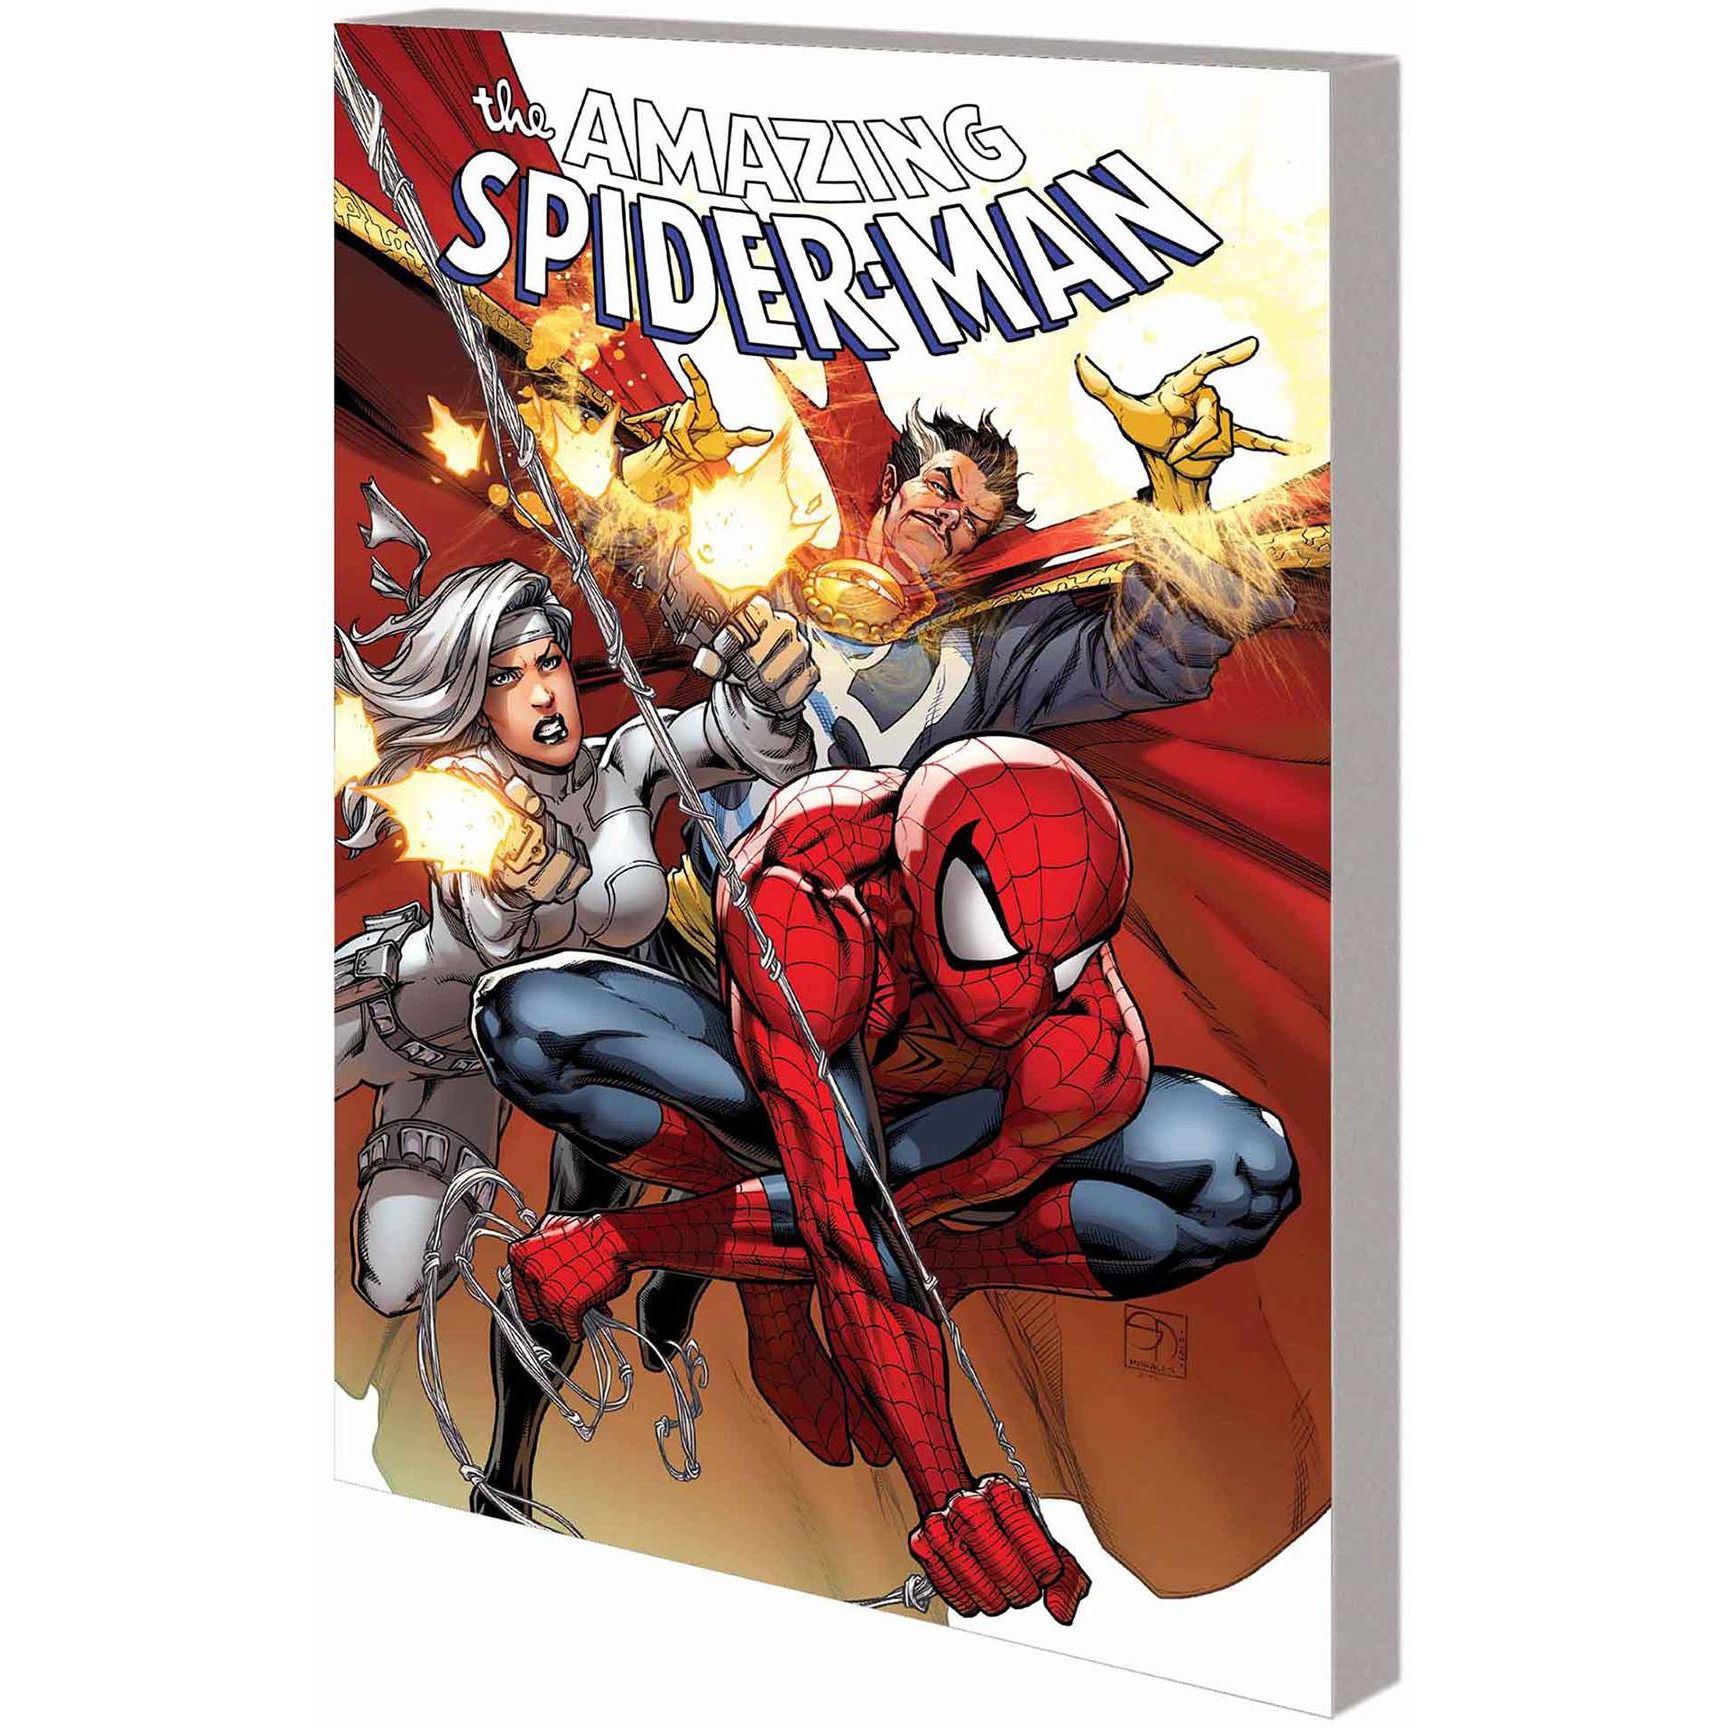  Amazing Spider-Man Big Time Complete Collection Vol. 3 TP Uncanny!